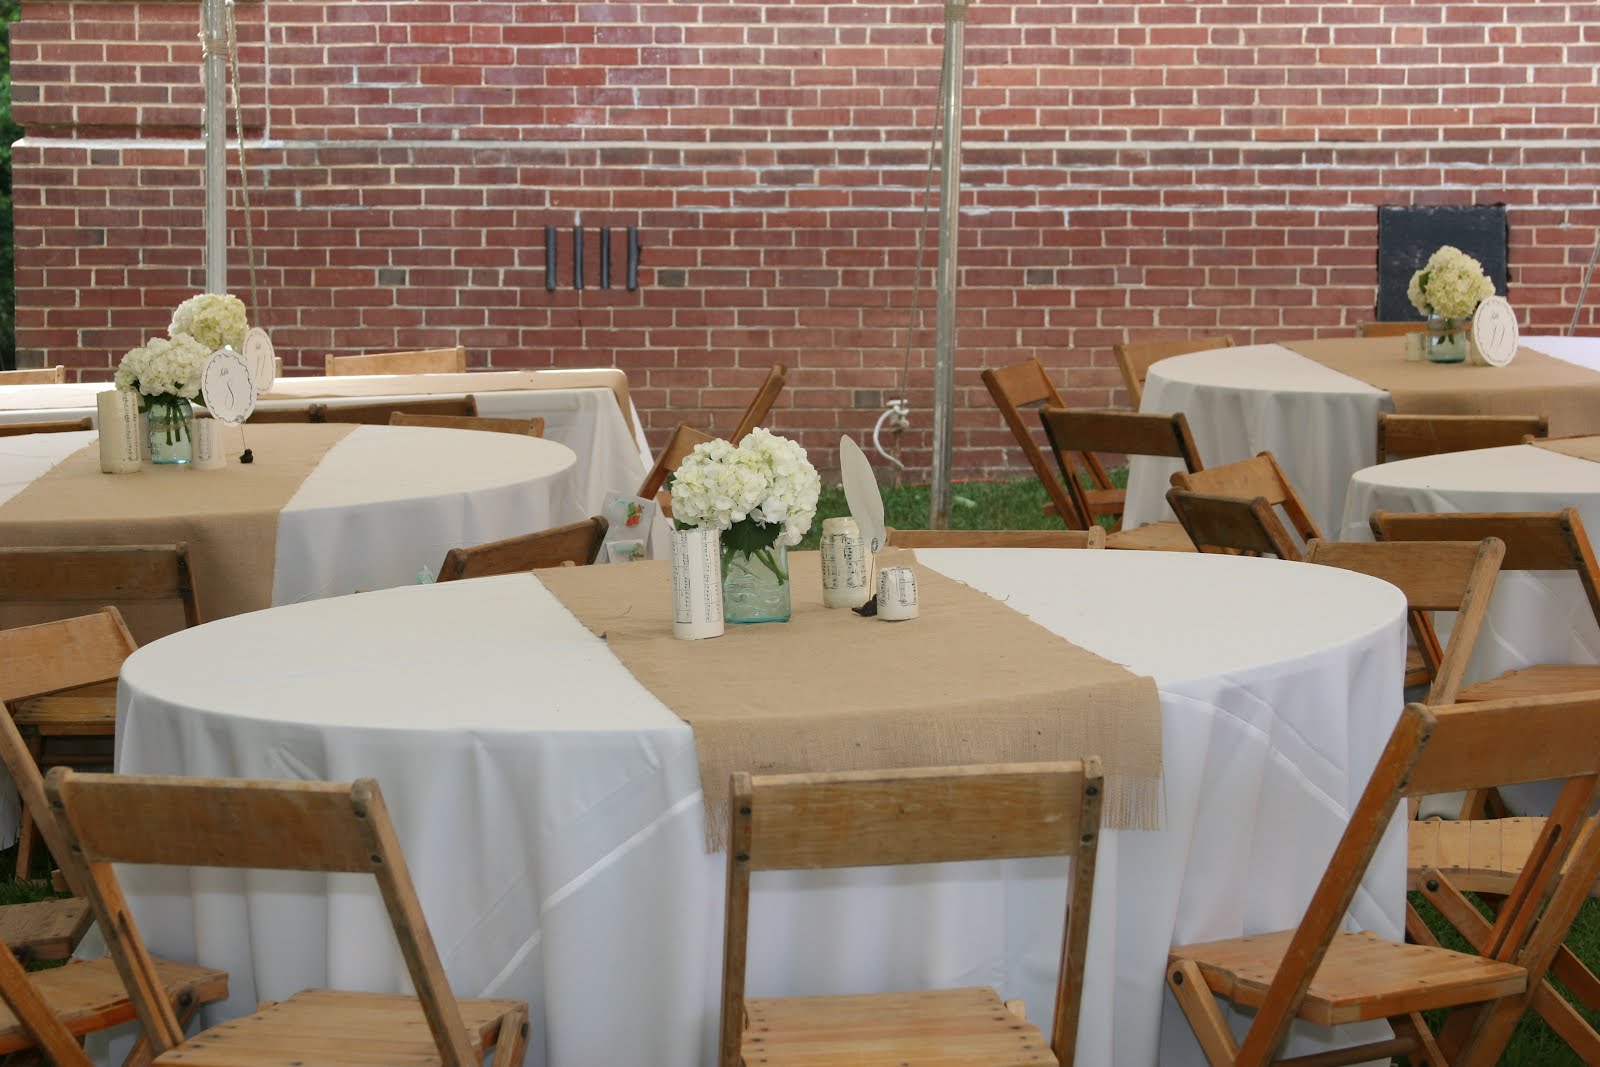 Runners Burlap Pierson's:  how Becoming to Table use DIY: table runners the